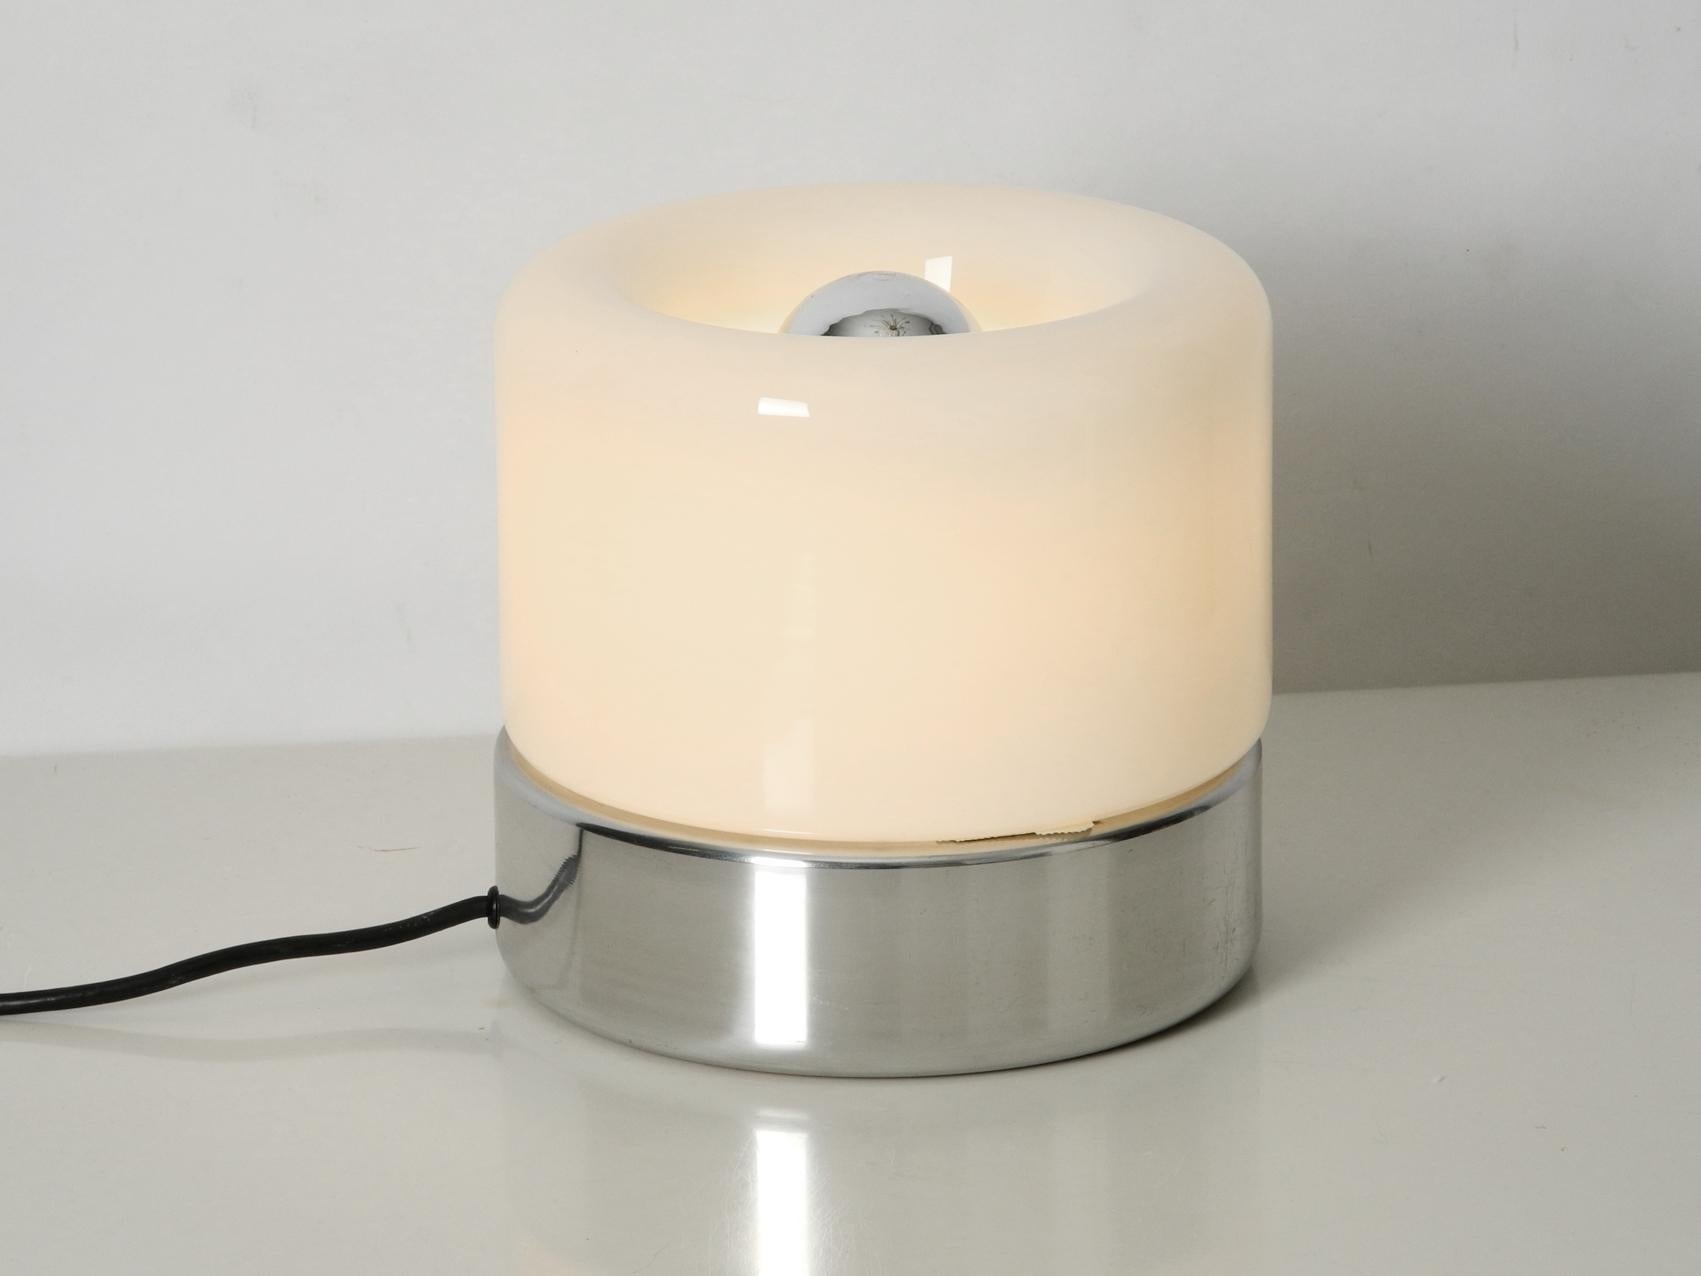 1960s Minimalist Metal Table Lamp and Glass Shade by Doria Space Age Design 6